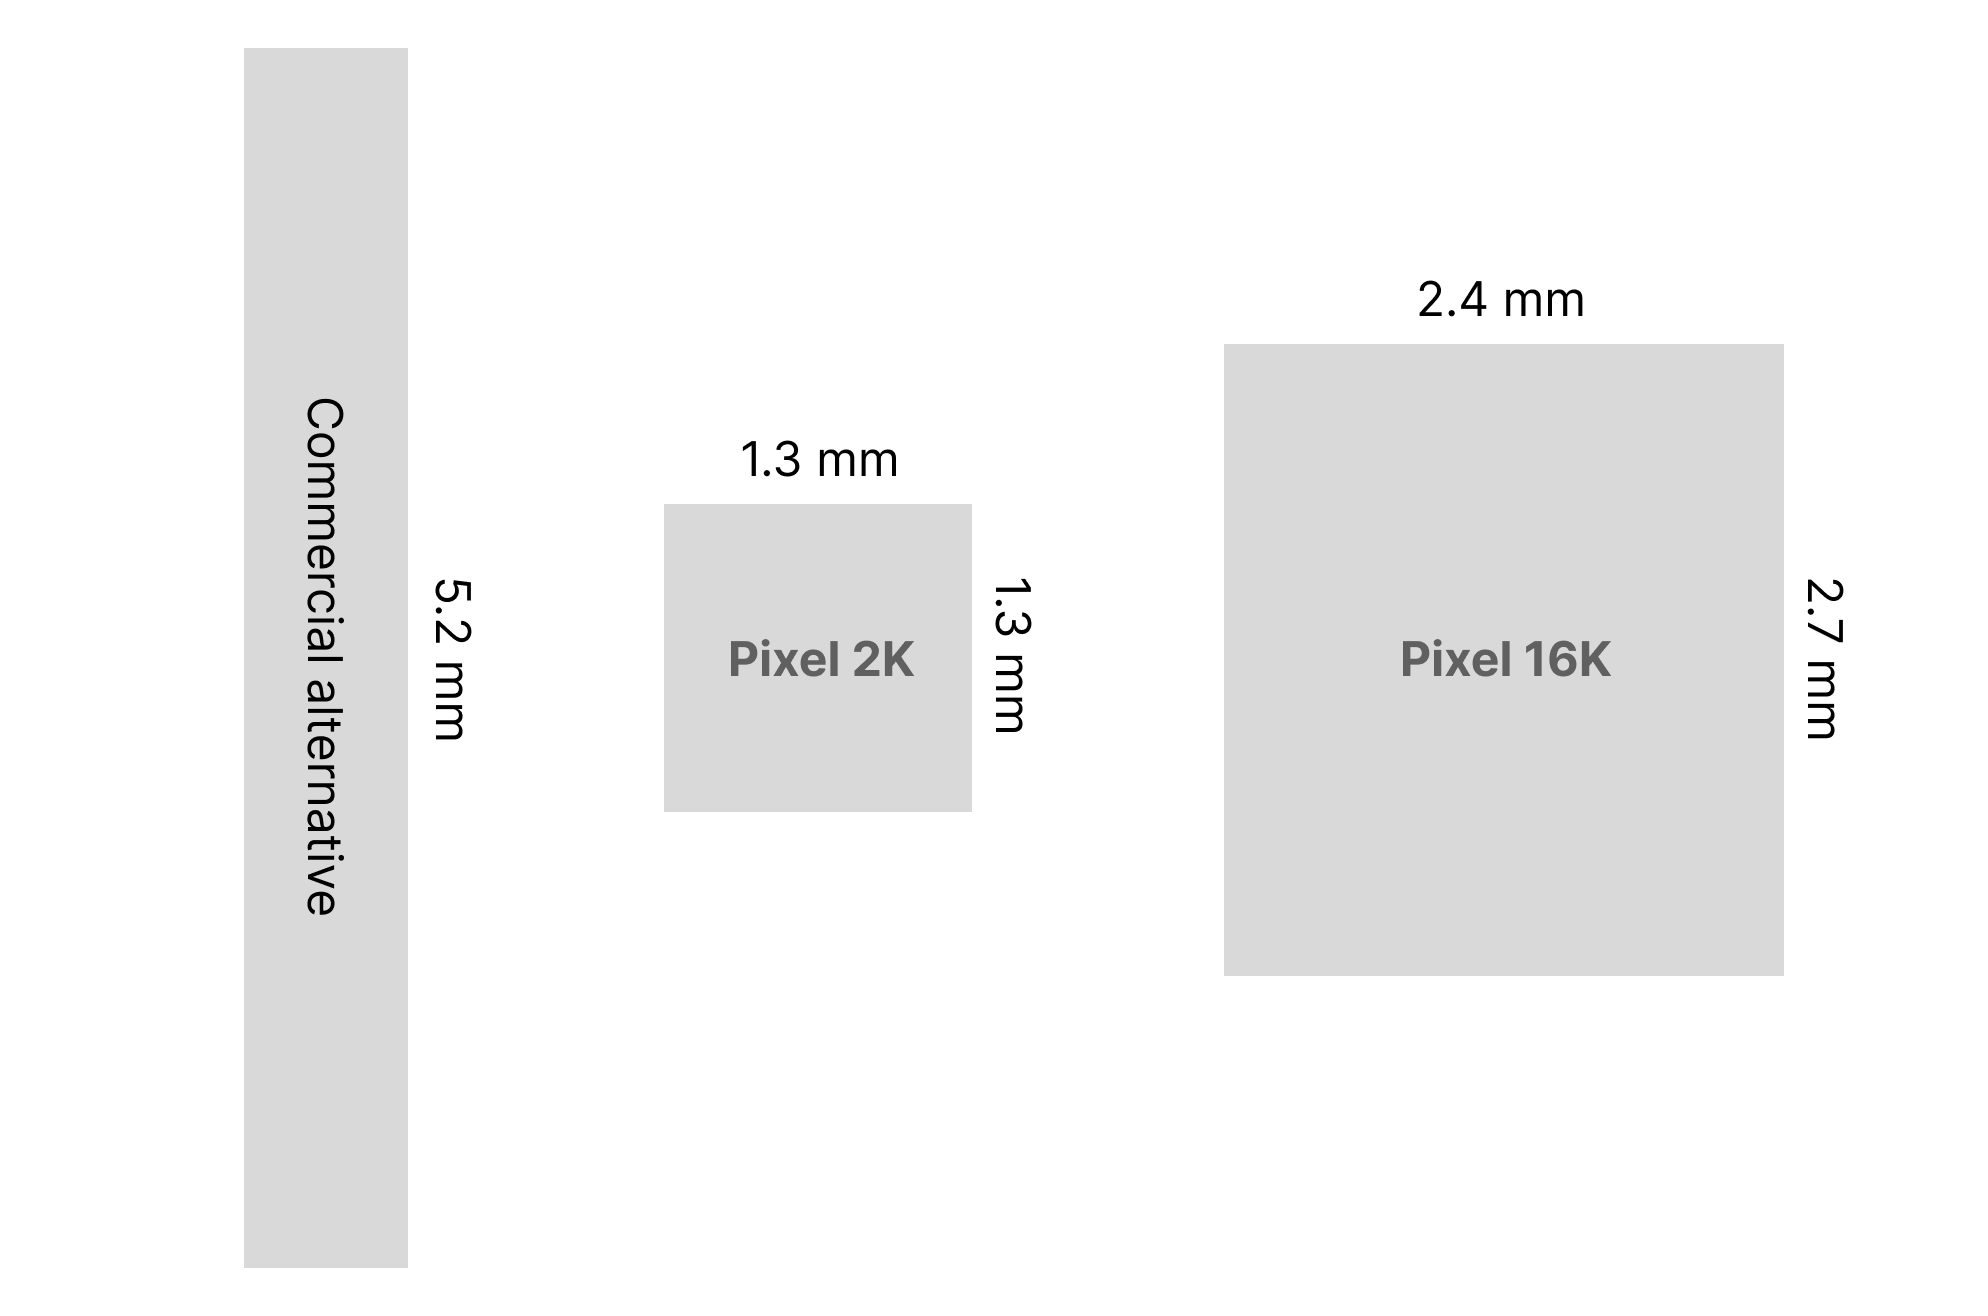 An illustration showing a size comparison of the Pixel 2K, Pixel 16K and a comparable commercial alternative